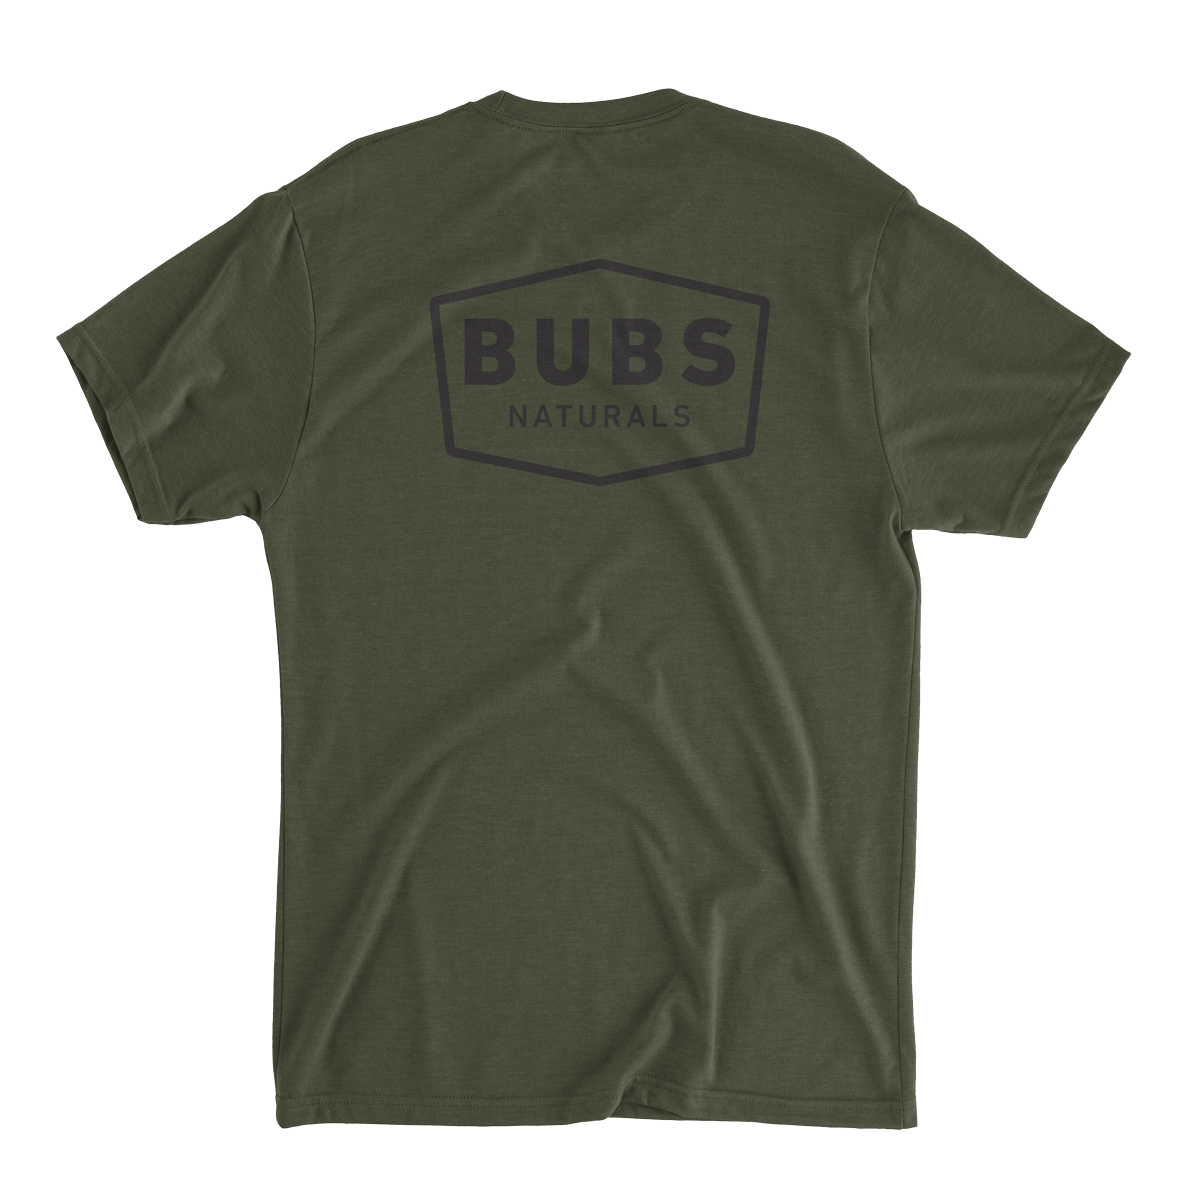 Mens Heathered Green Crew T-Shirt with large BUBS Naturals logo on the back